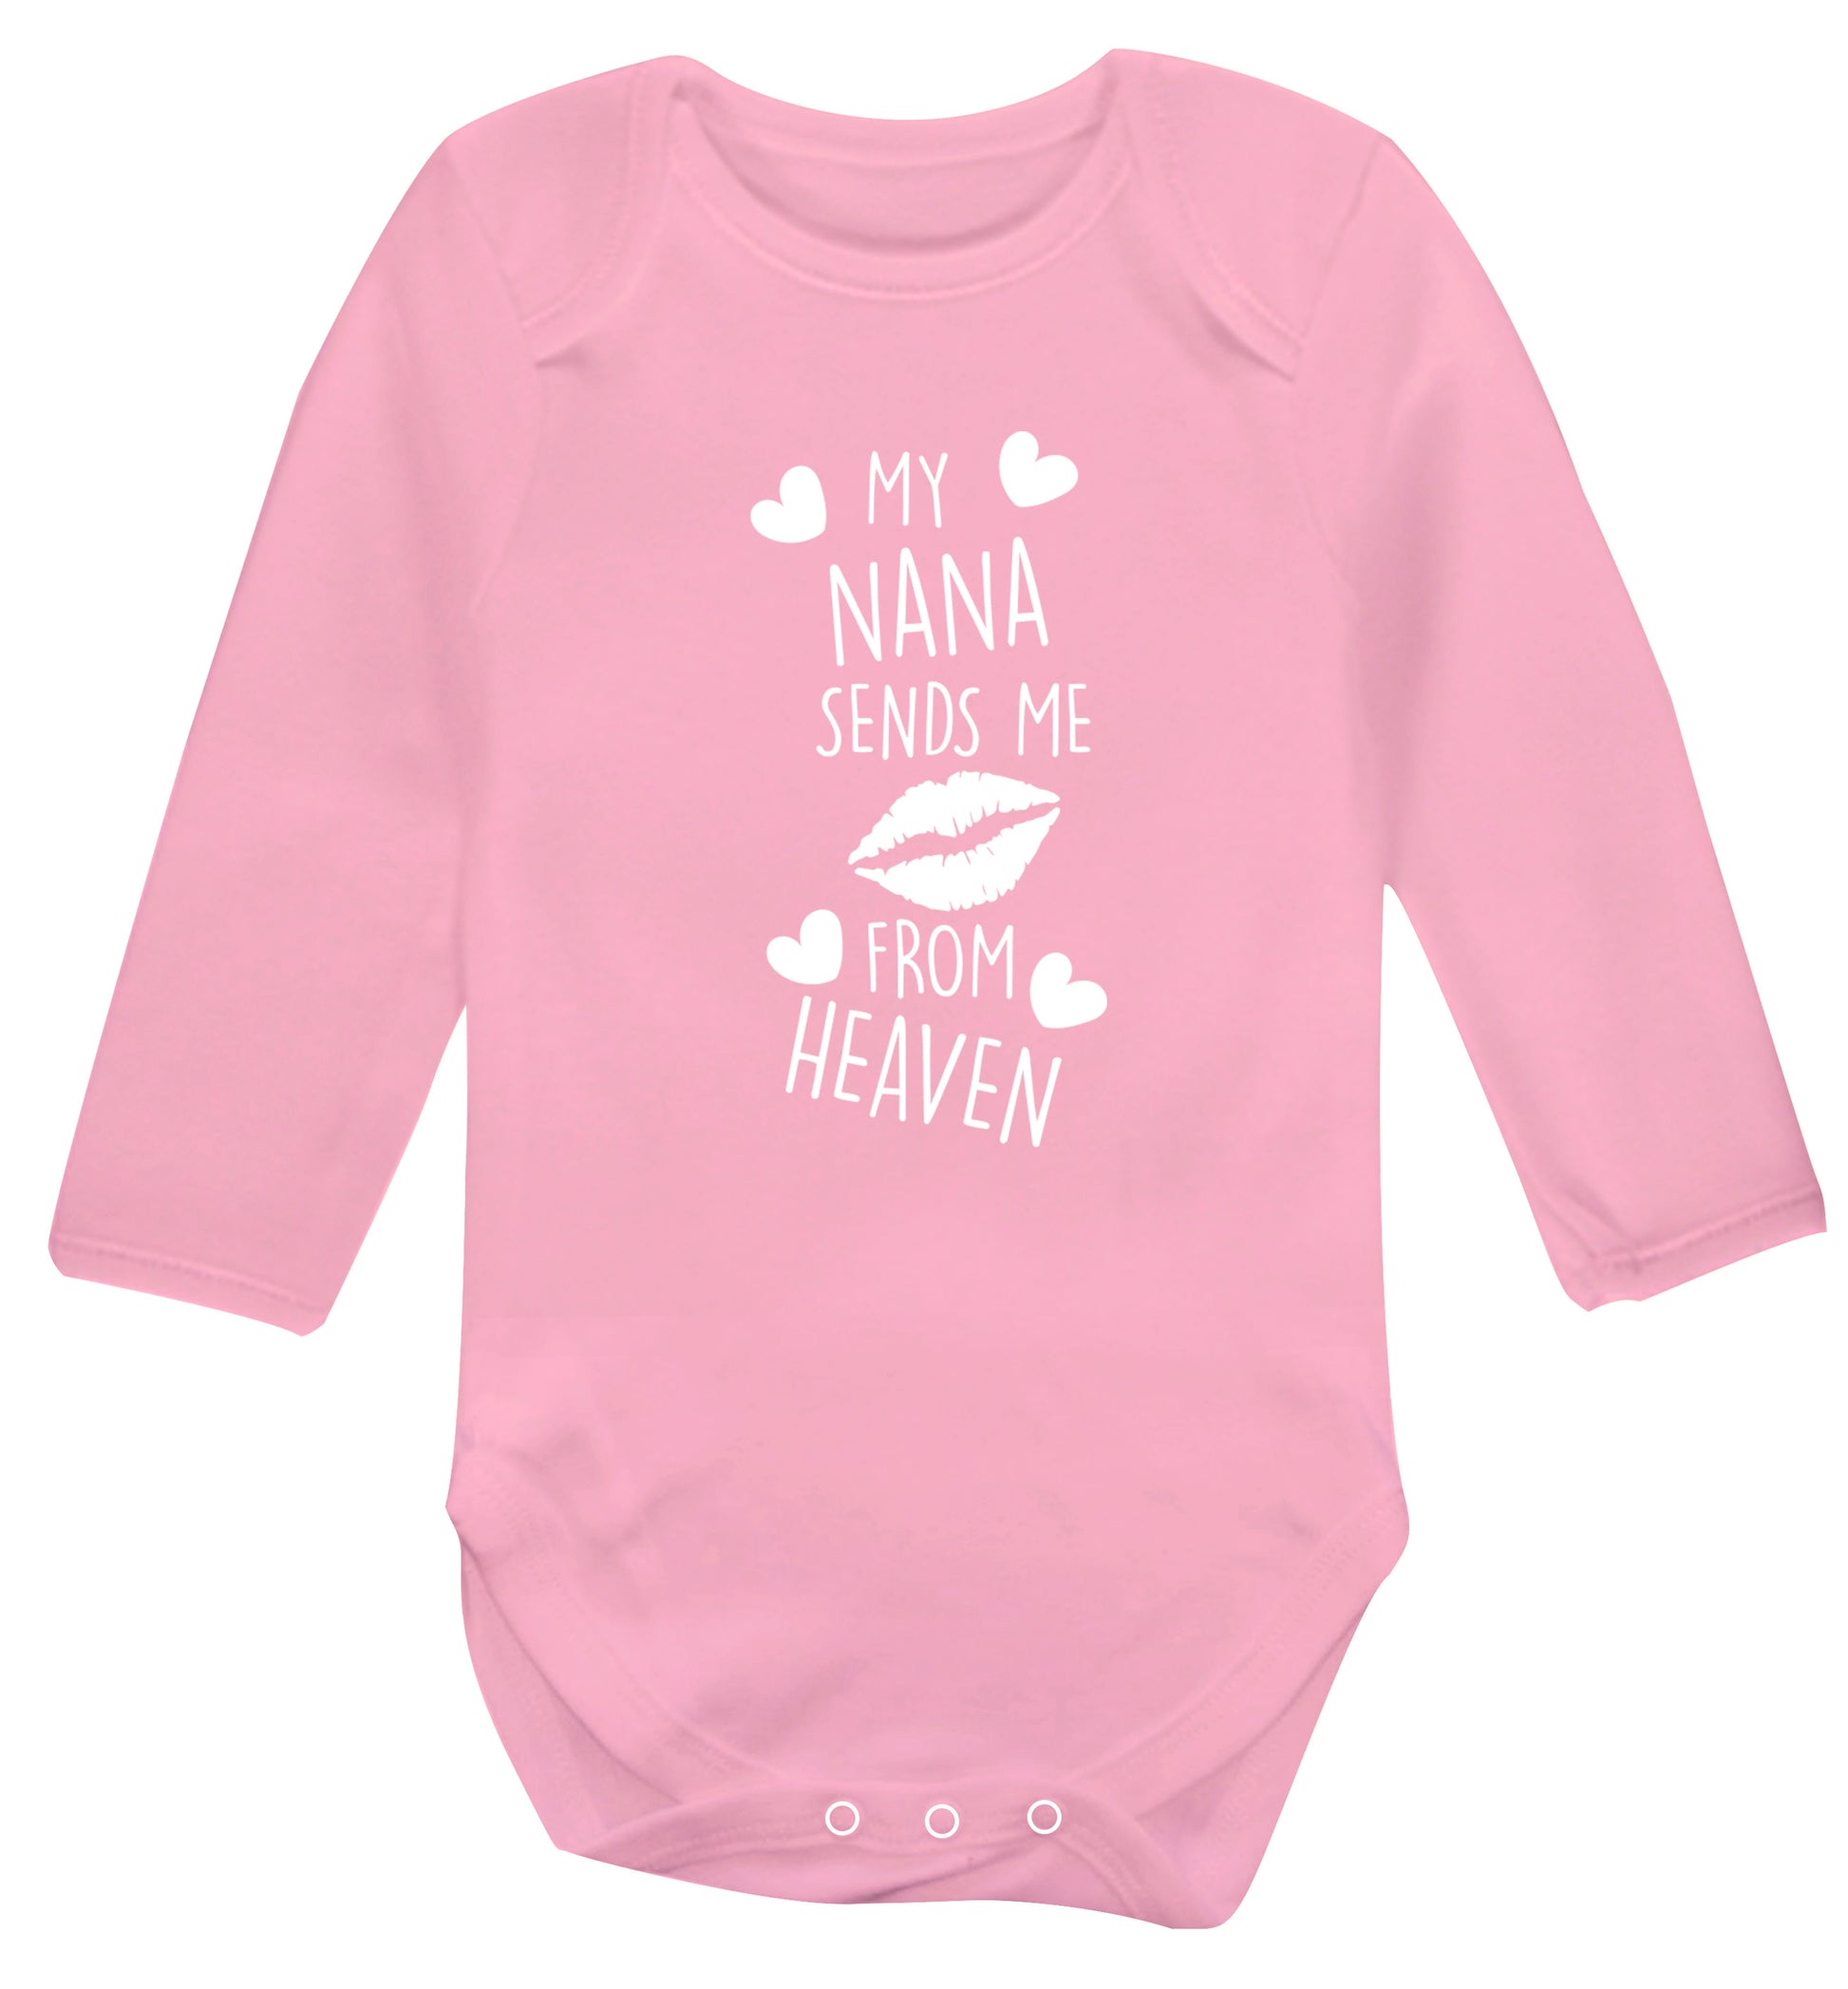 My nana sends me kisses from heaven Baby Vest long sleeved pale pink 6-12 months